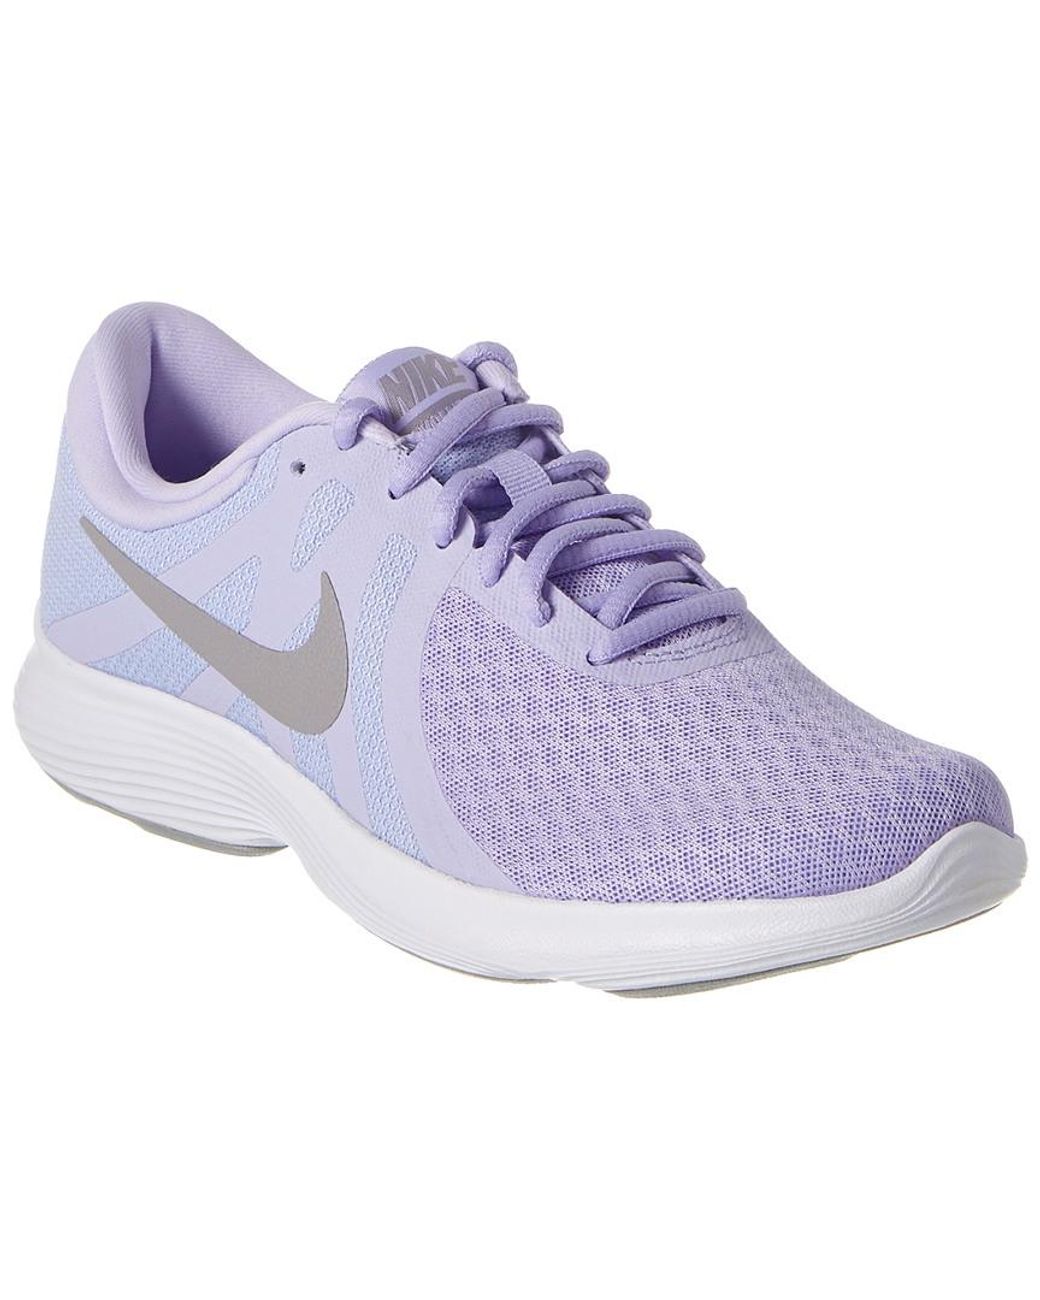 Expression Forge Physics Nike Revolution 4 in Purple | Lyst